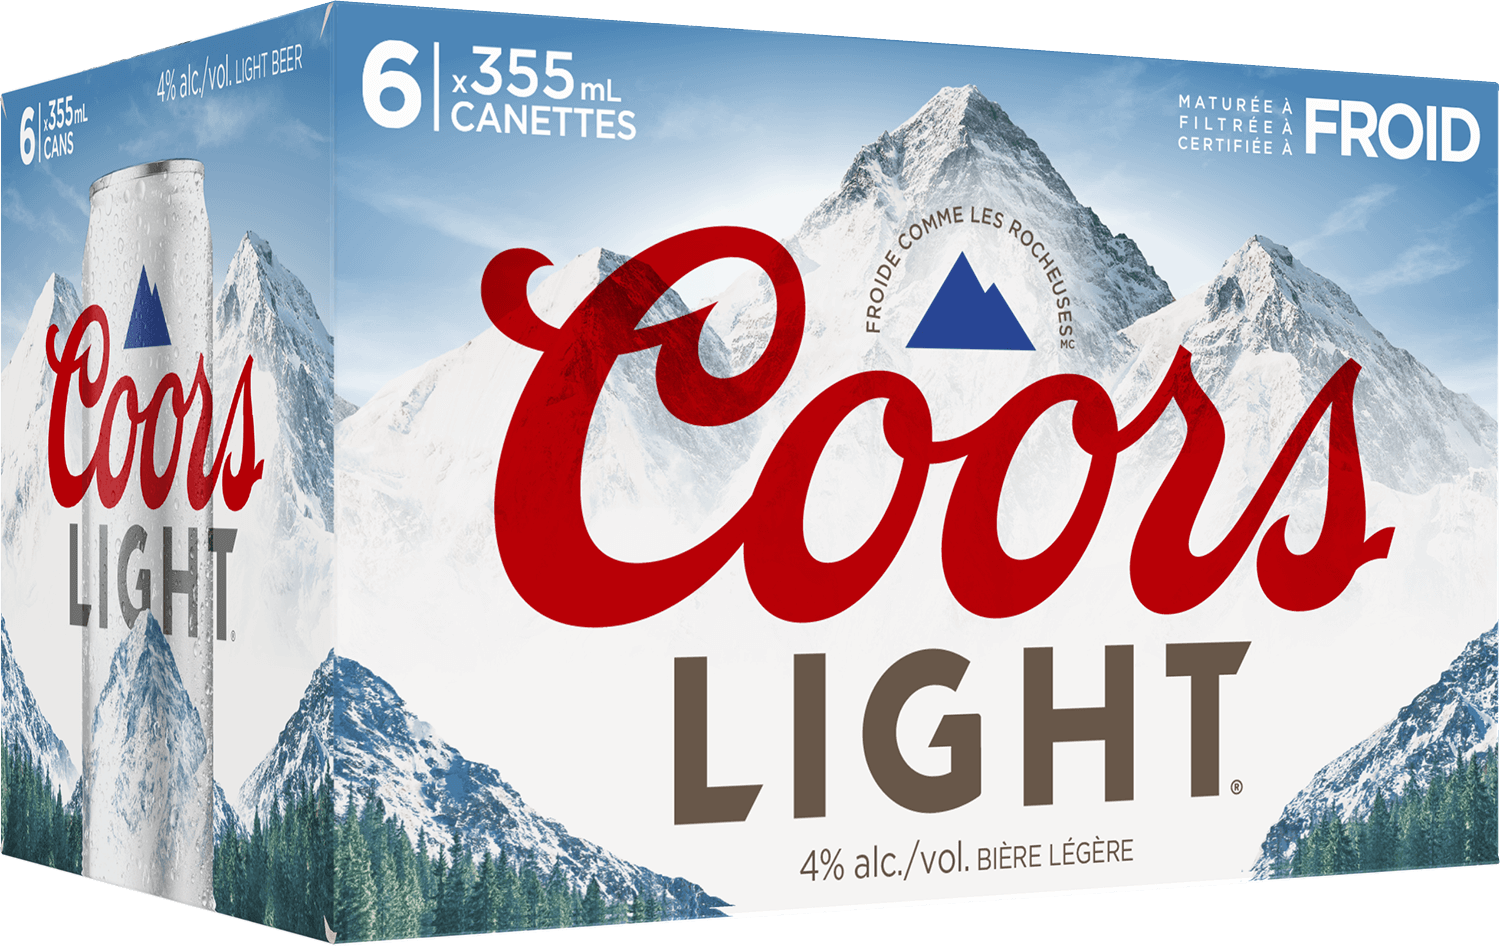 Coors Light cans